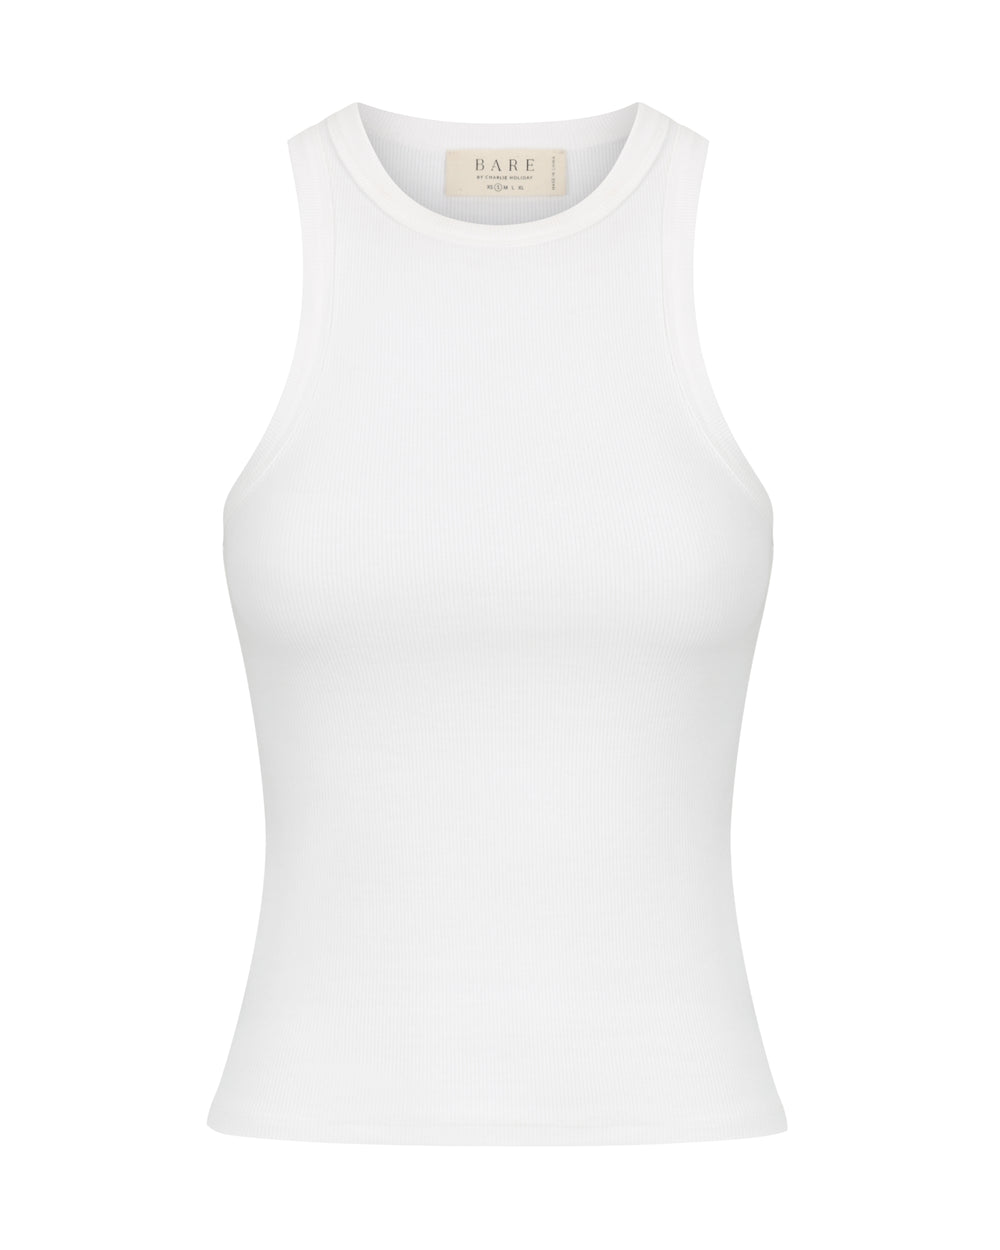 The Cut Out Singlet